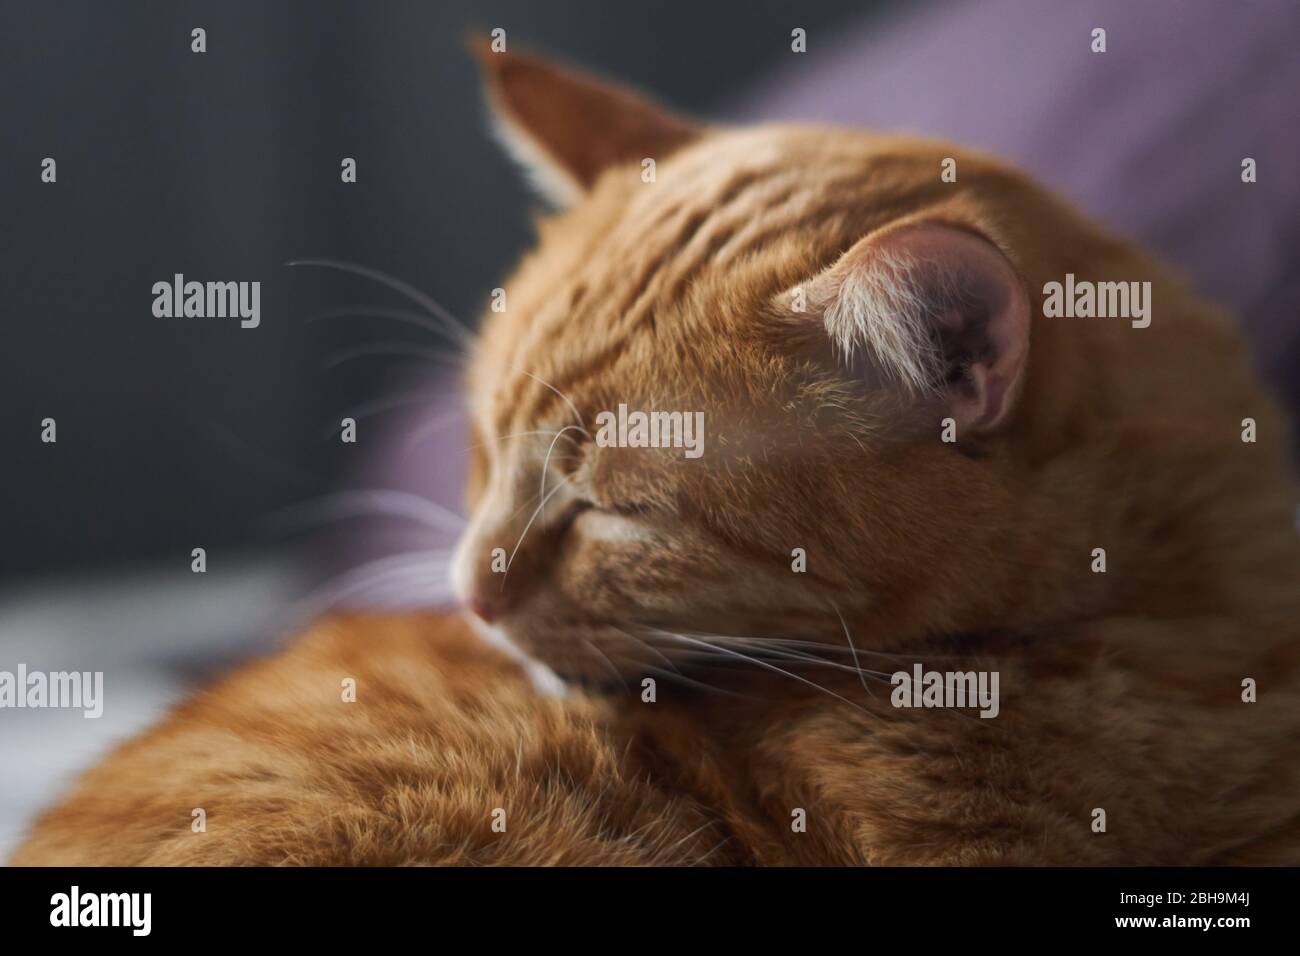 Relaxing ginger tabby cat licks the hair, washes himself in relaxing mode. Calmness and tranquility concept. Stock Photo